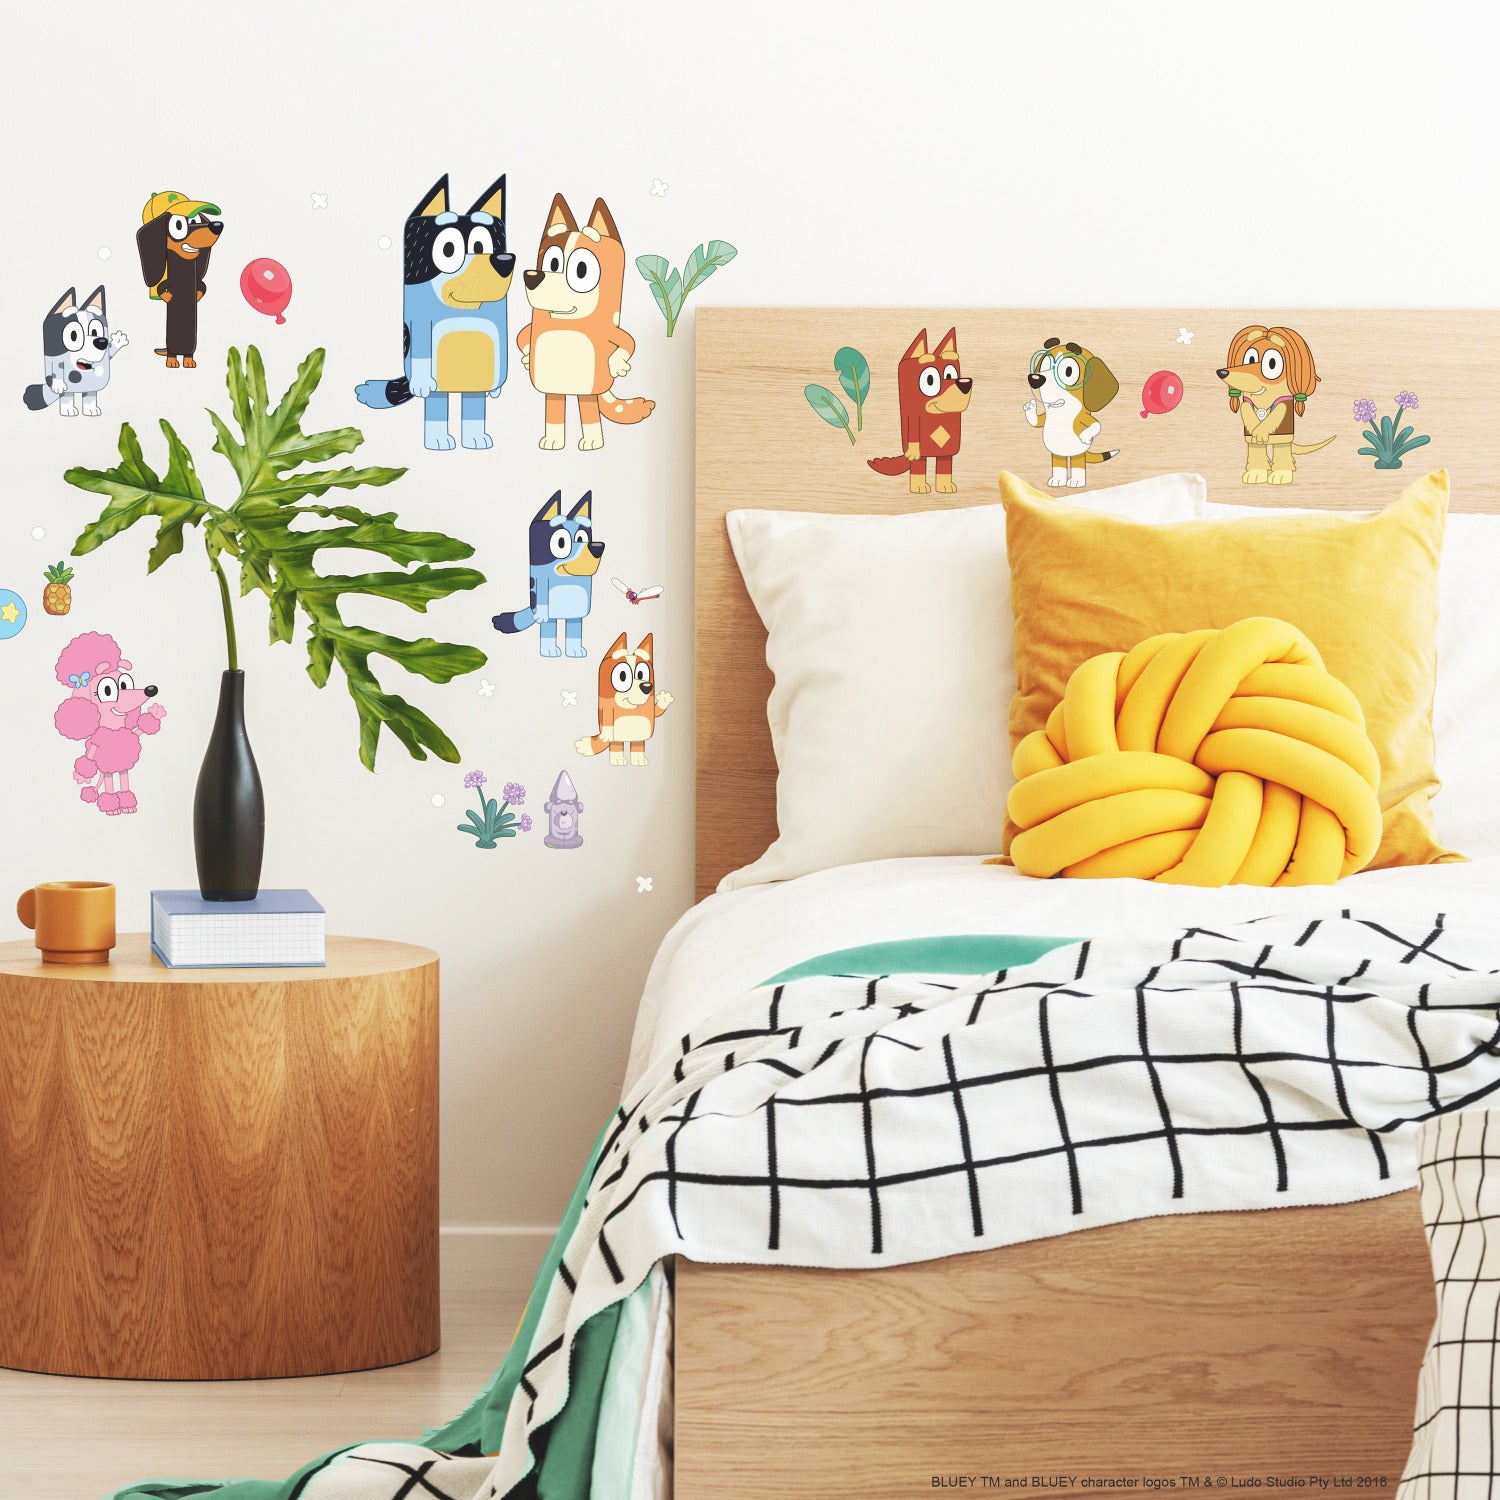 RoomMates Decor: Peel and Stick Wallpaper, Wall Decals and More